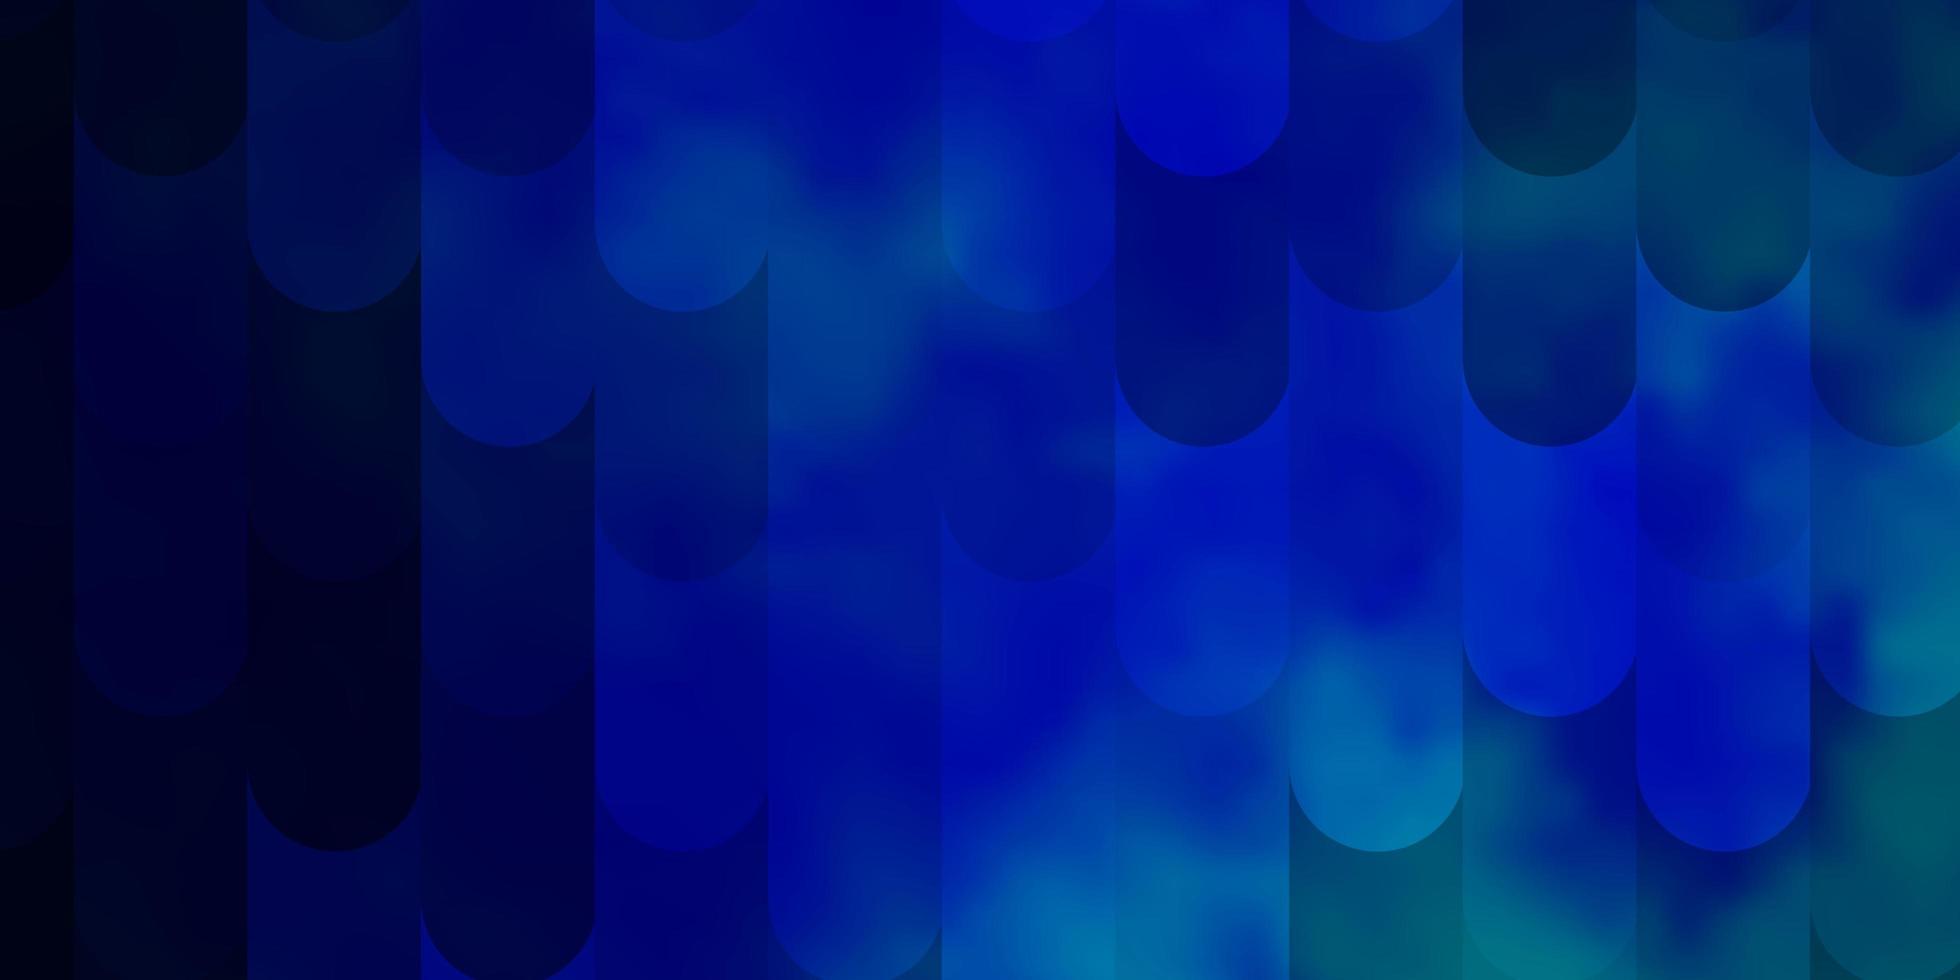 Light BLUE vector background with lines. Gradient illustration with straight lines in abstract style. Template for your UI design.